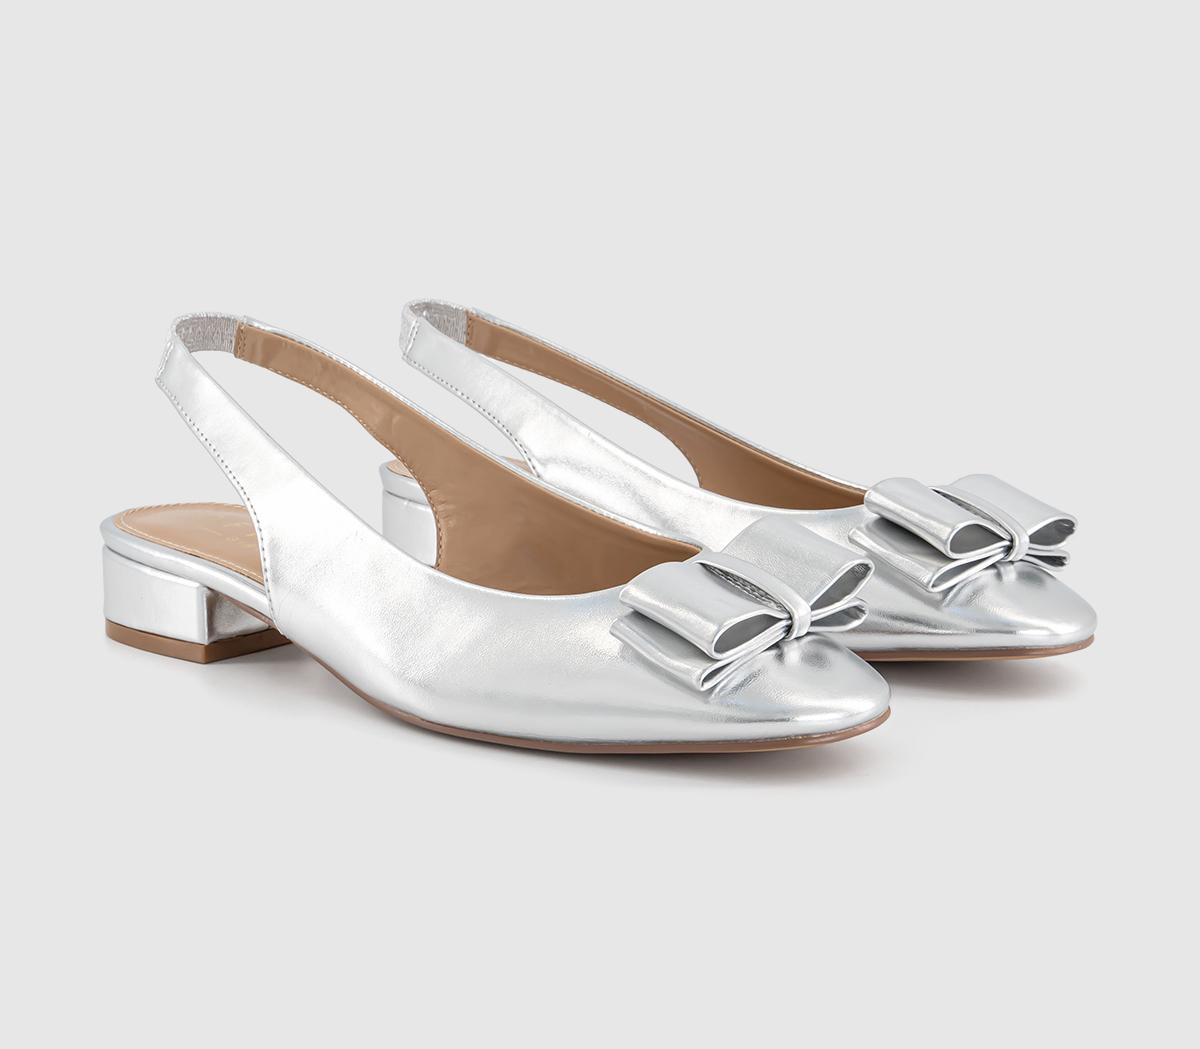 OFFICE Womens Fiesta Bow Slingback Ballerina Shoes Silver Patent, 9